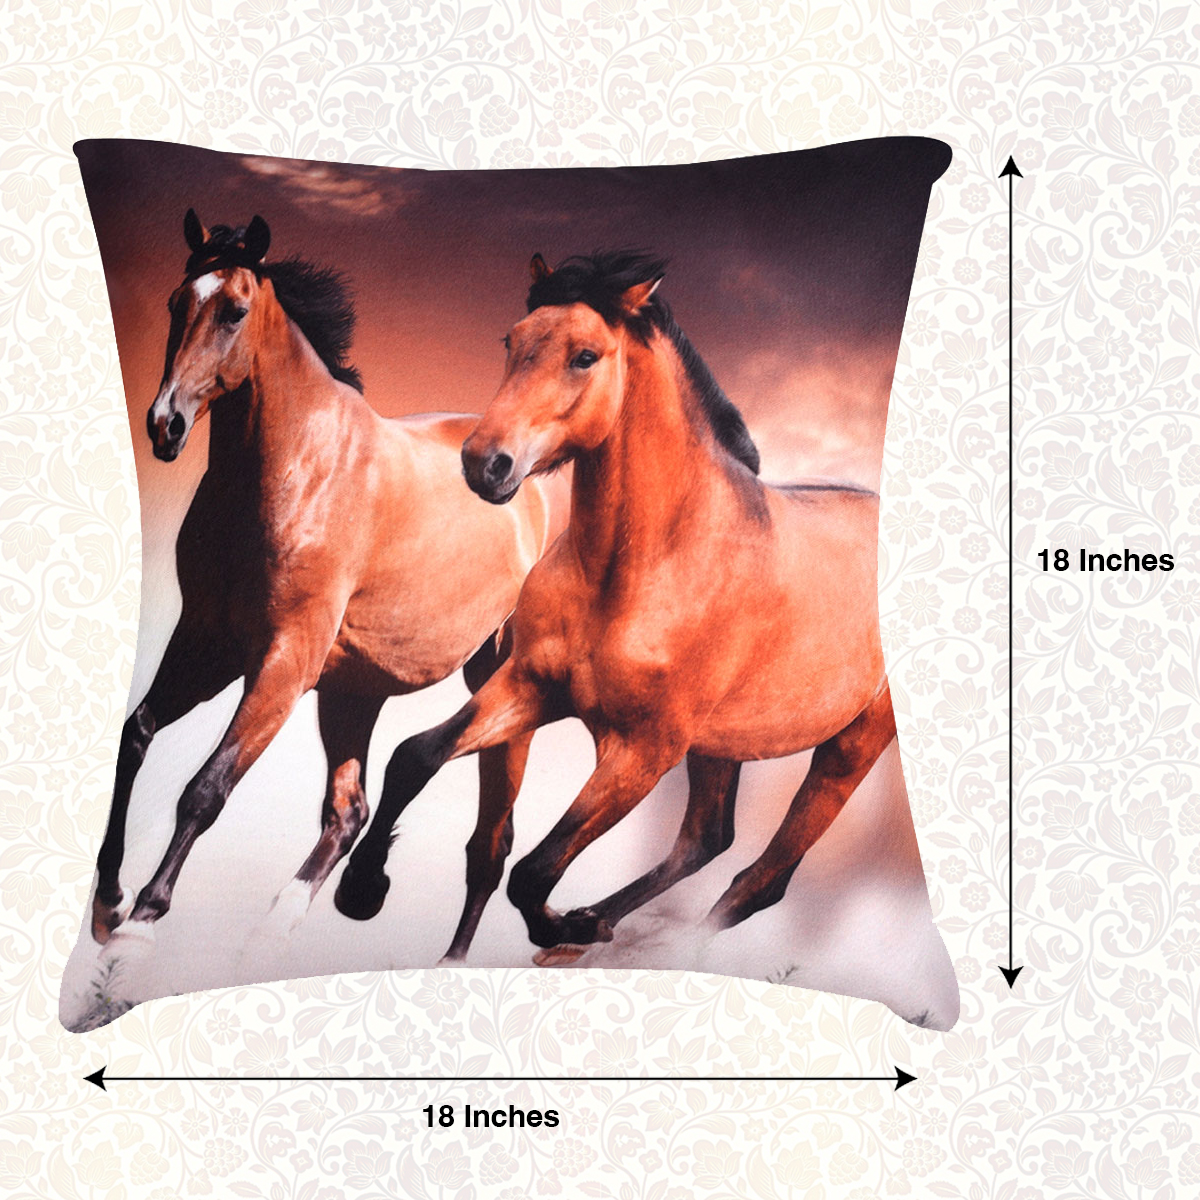 Horse Printed Throw Pillow Cover - Set of 4, 18 x 18 Inches - Decozen